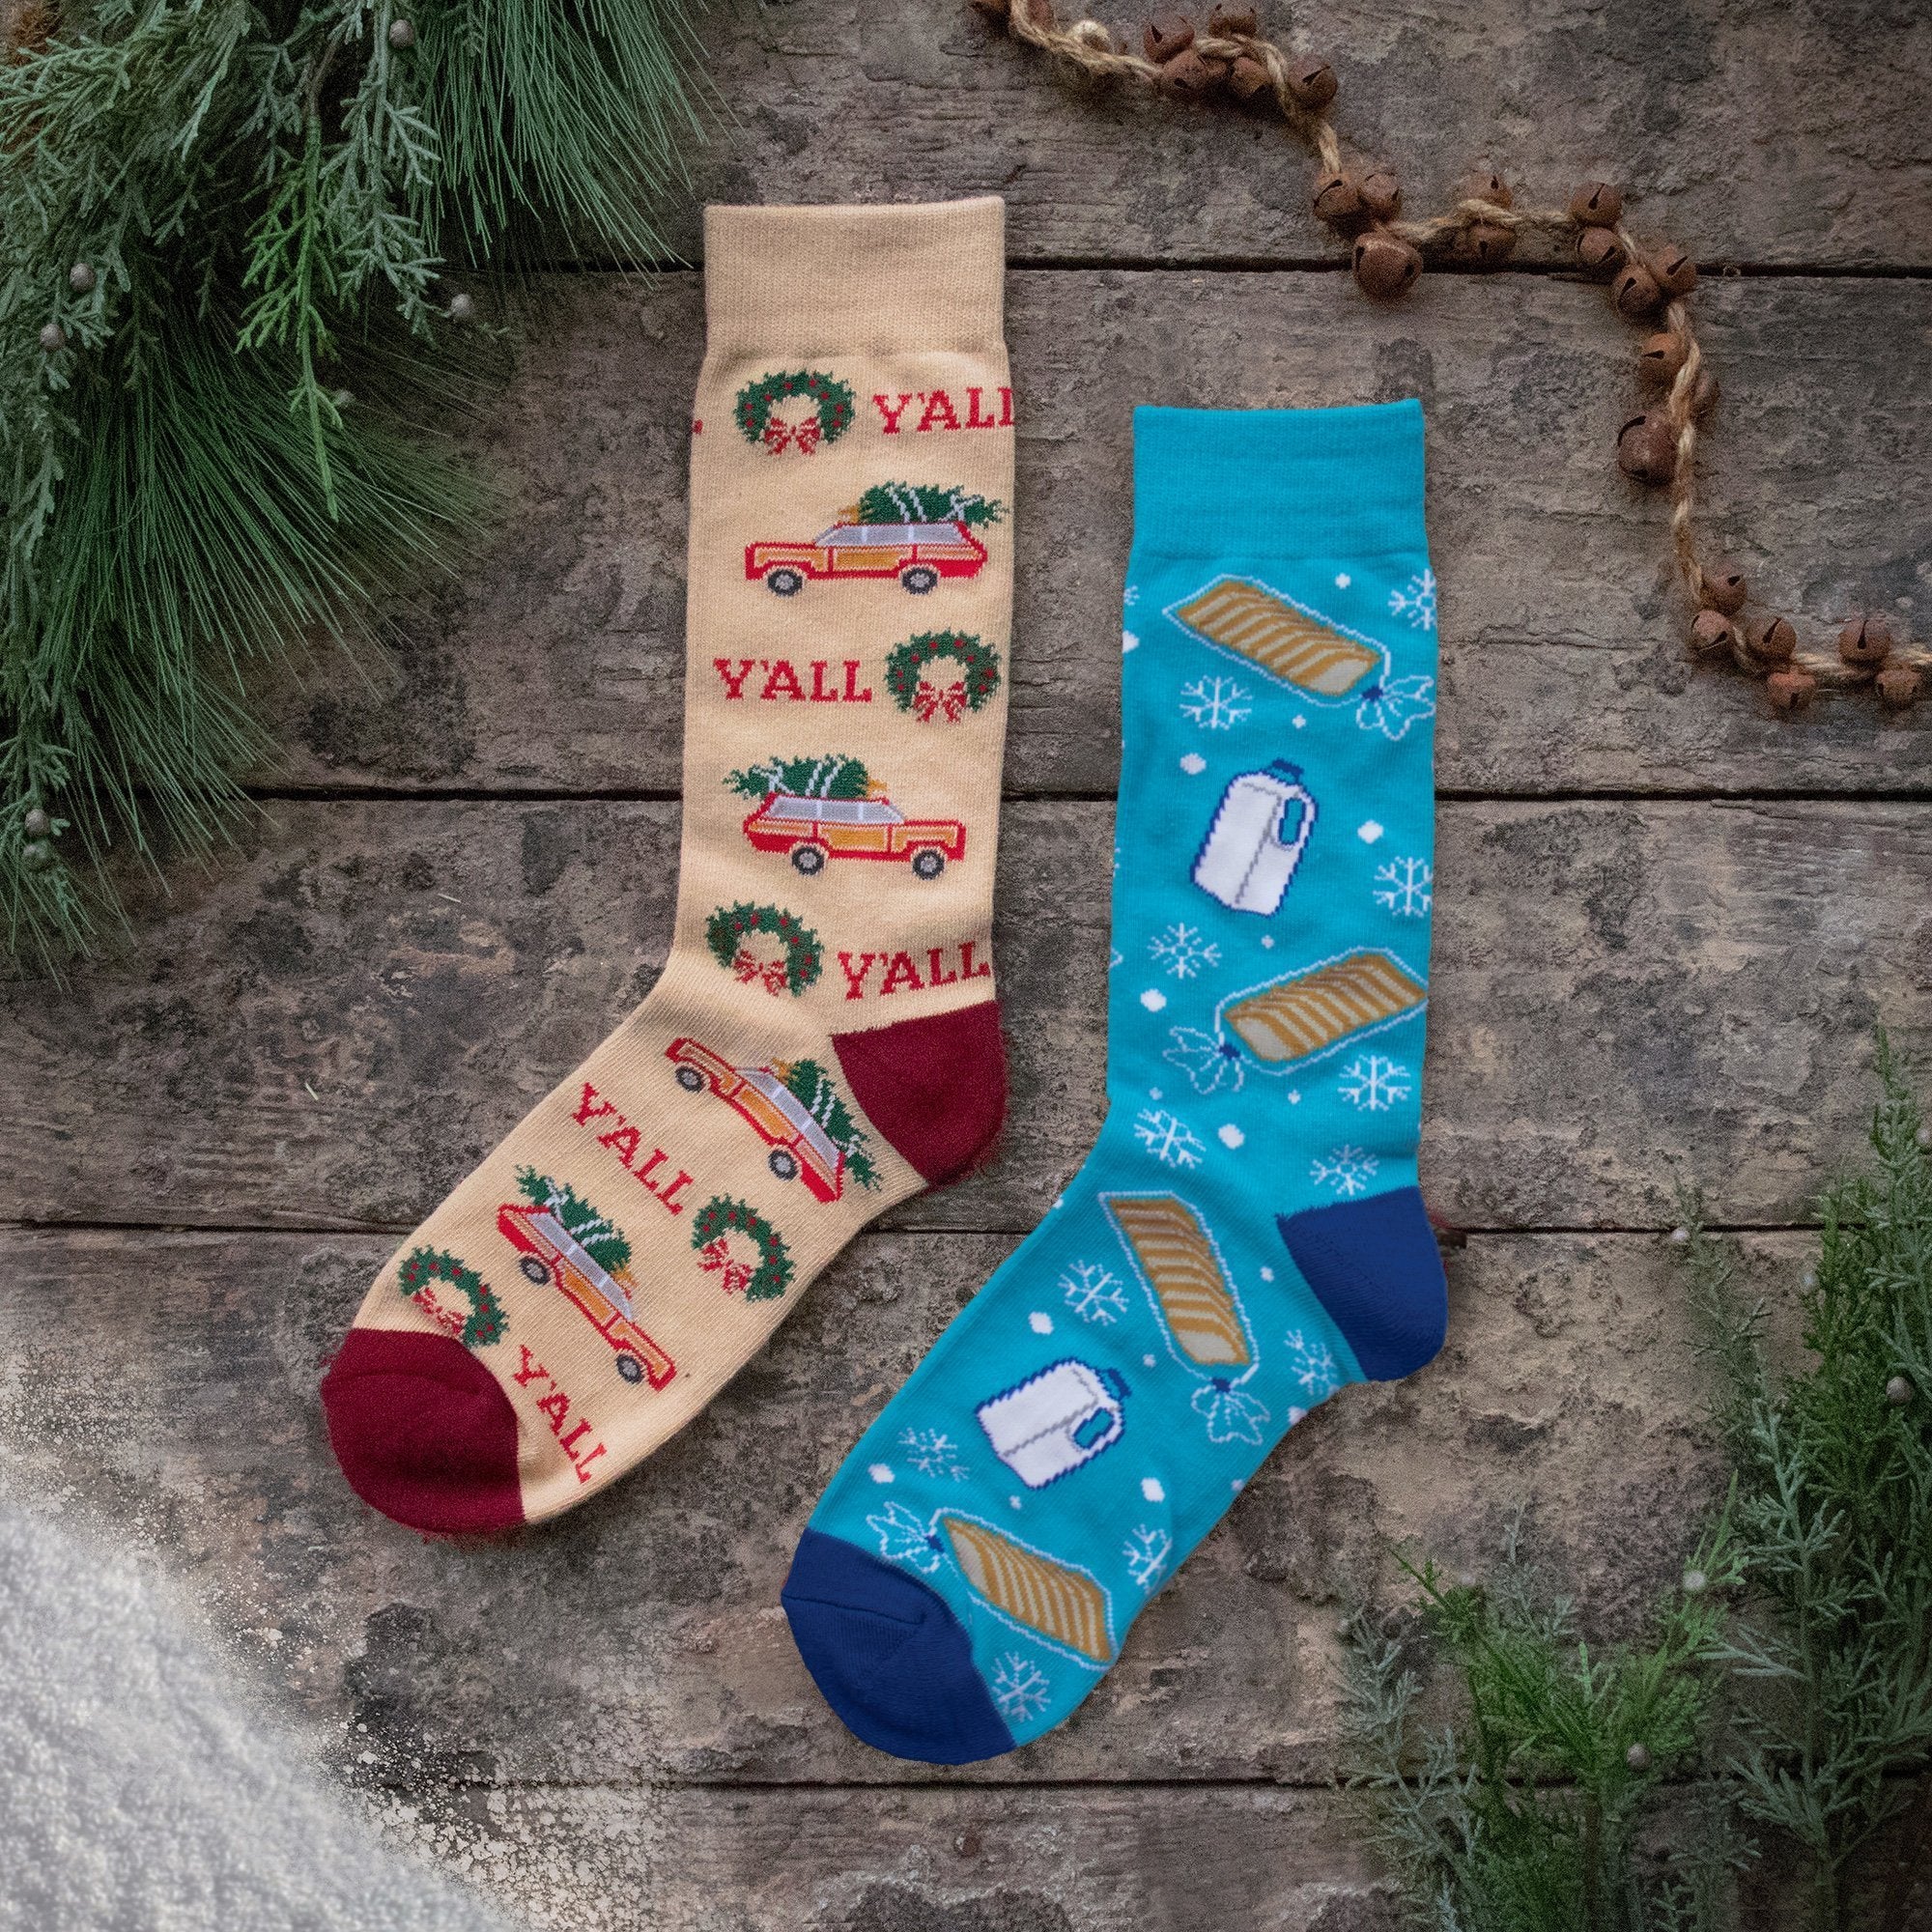 New Y'ALLiday Socks for the Holidays!